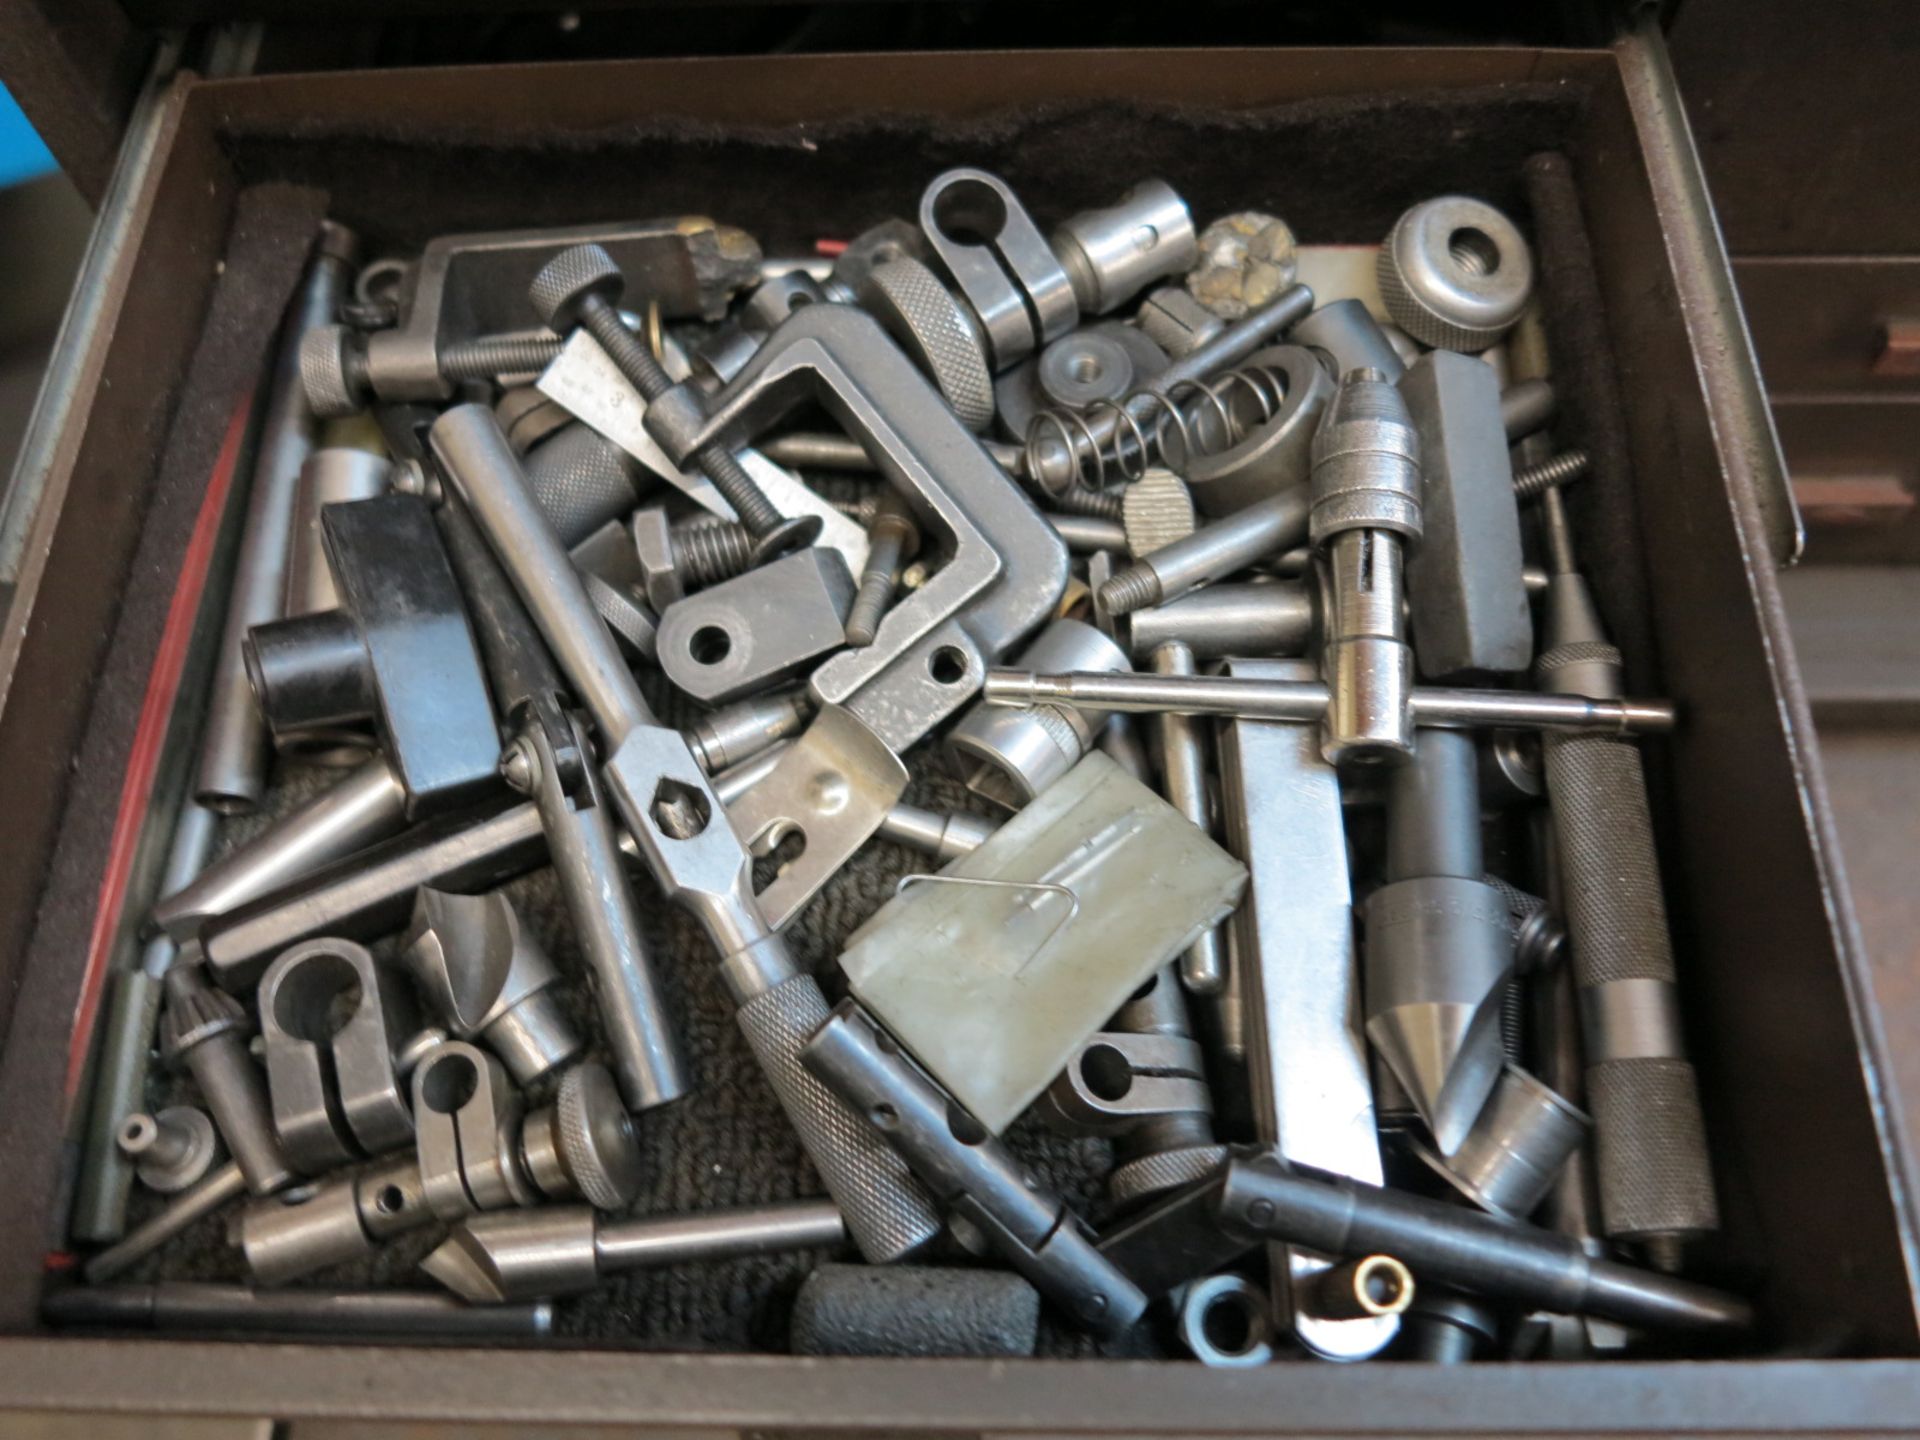 KENNEDY TOP BOX, FULL OF MACHINIST HAND TOOLS - Image 7 of 10